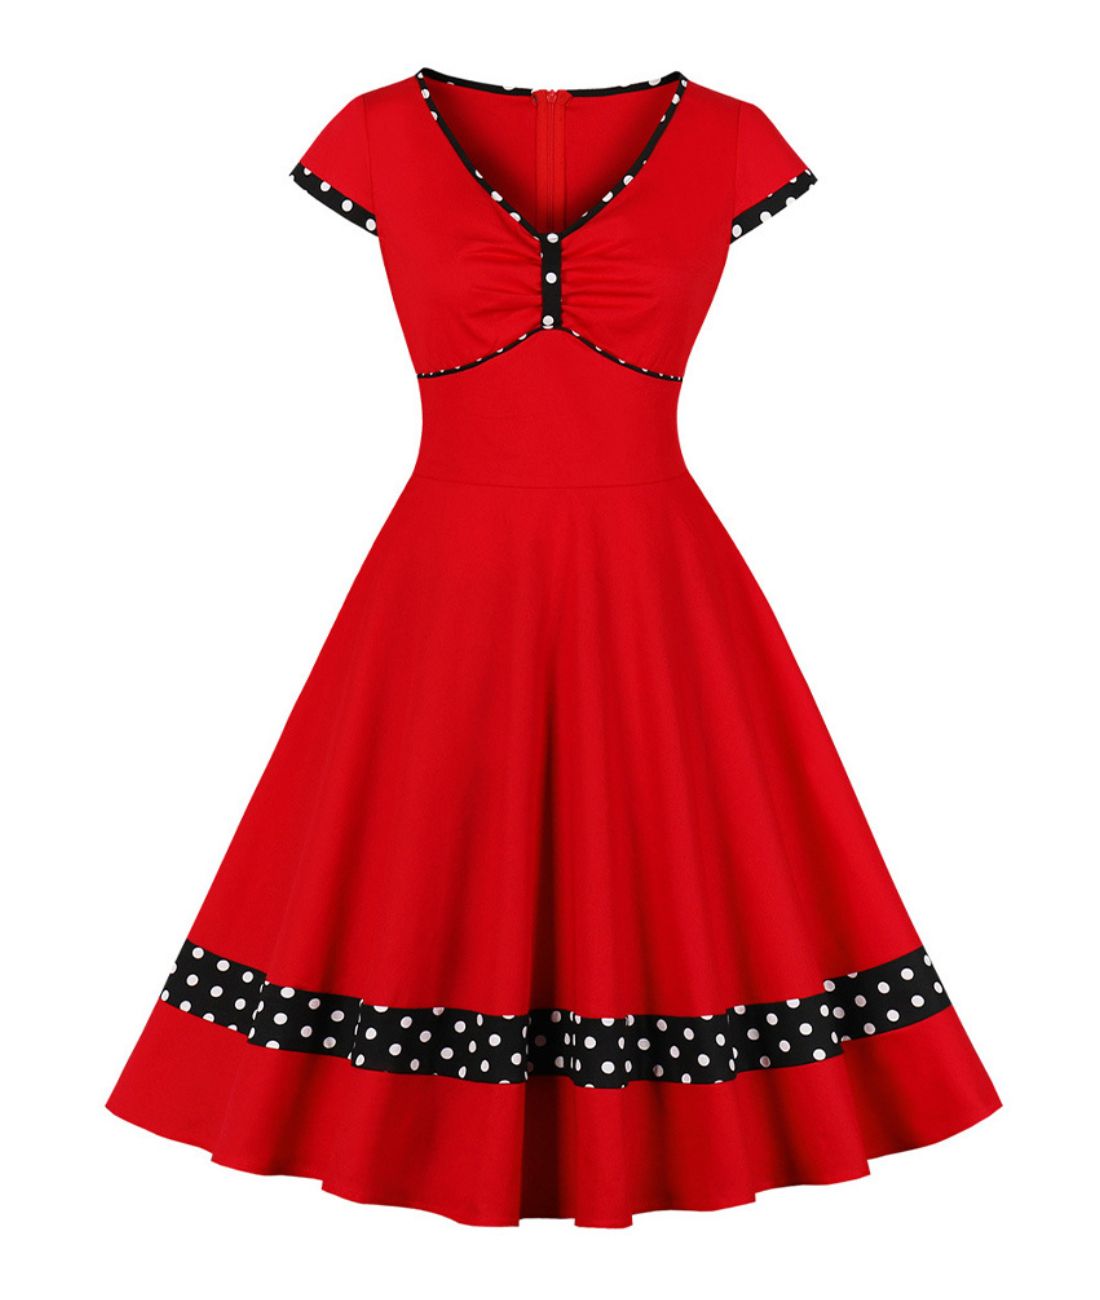 Robe Cocktail Style Année 50 - Madame Vintage